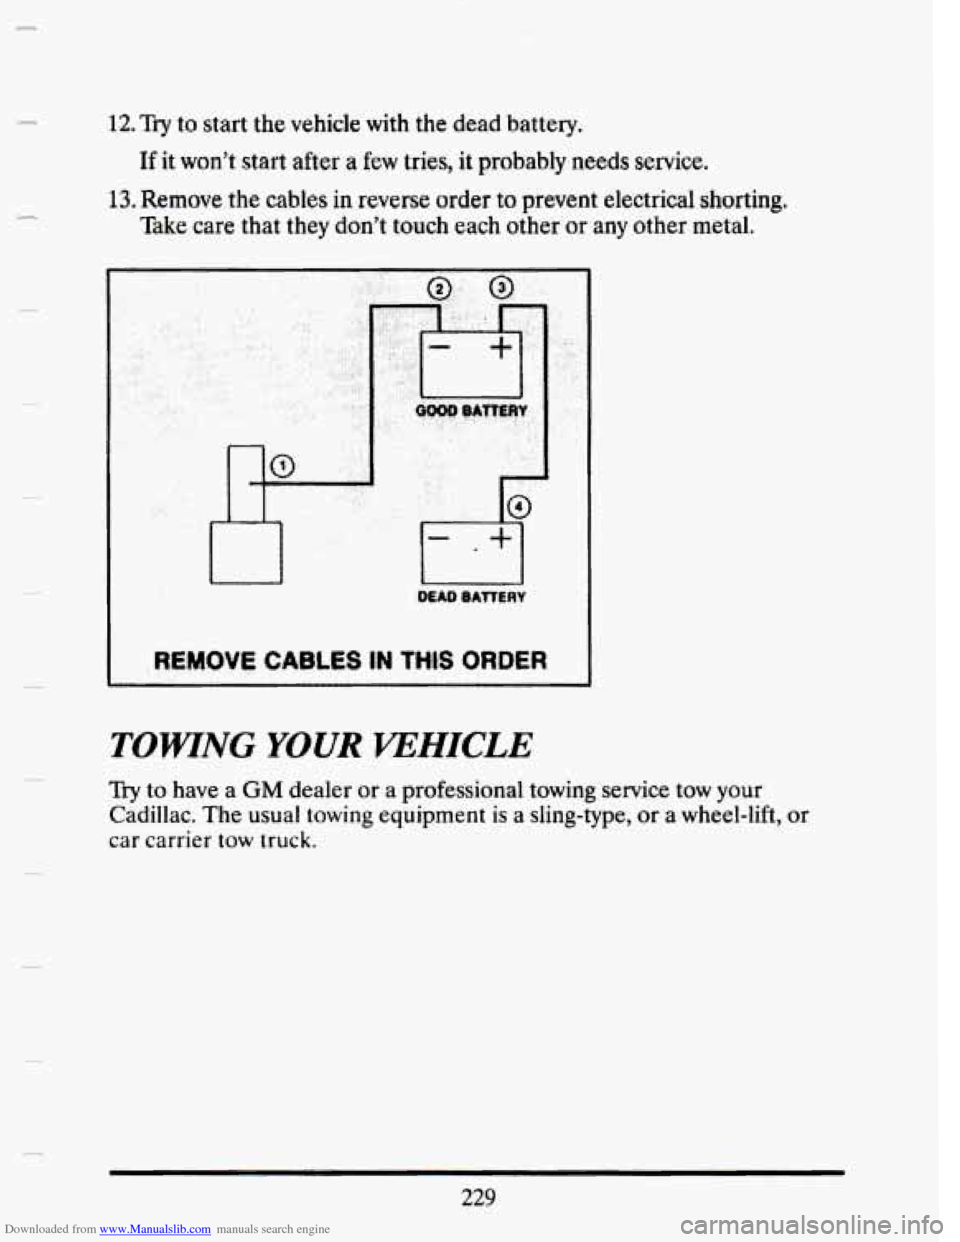 CADILLAC SEVILLE 1993 4.G Owners Manual Downloaded from www.Manualslib.com manuals search engine I 12. Try to start  the vehicle  with  the  dead  battery. 
If it  won’t  start after a few tries,  it  probably  needs service. 
13. Remove 